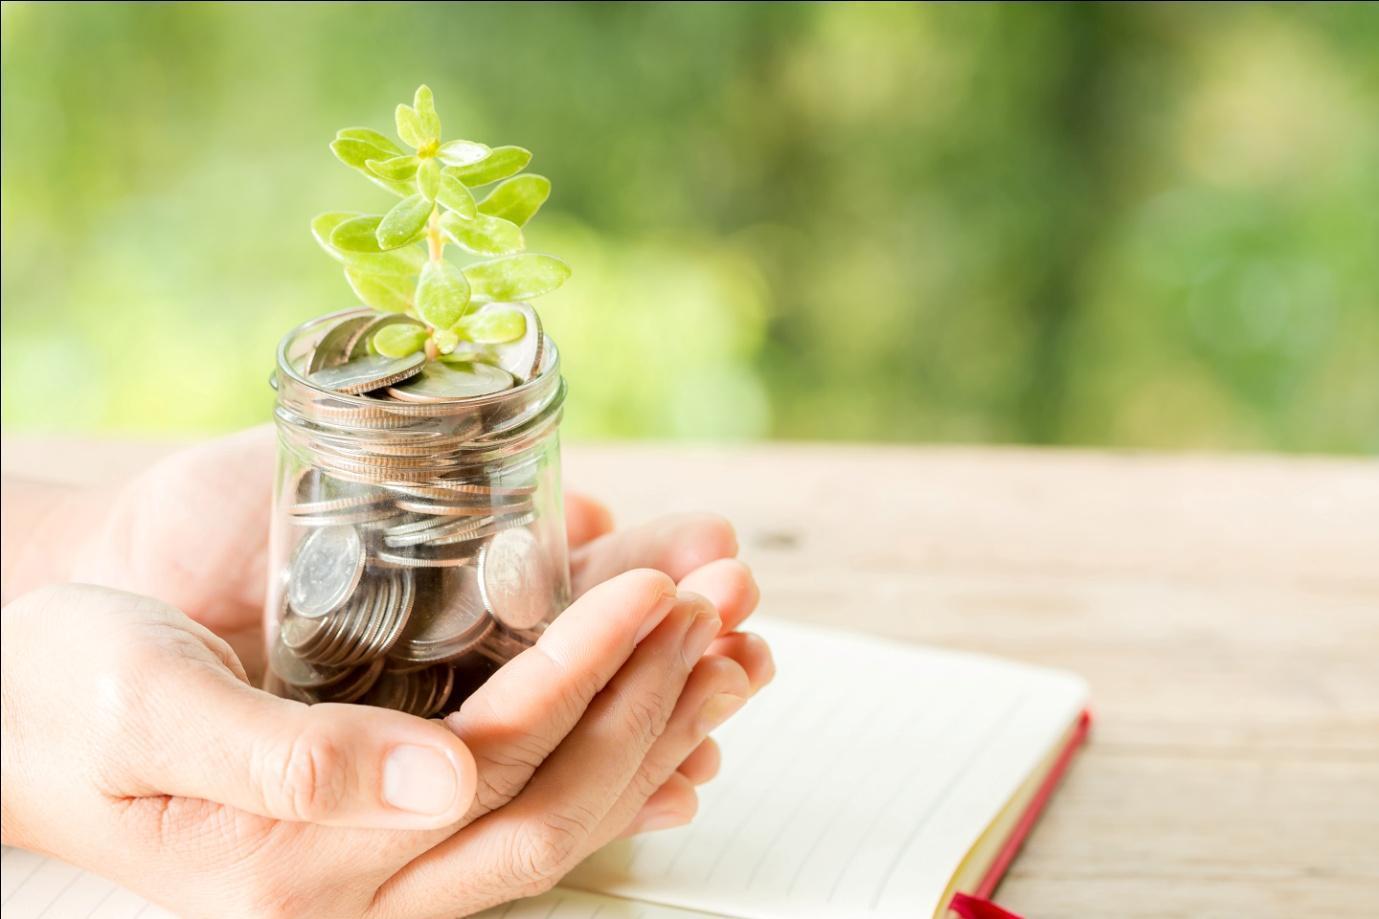 C:\Users\microsoft\Downloads\woman-hand-holding-plant-growing-from-coins-bottle.jpg